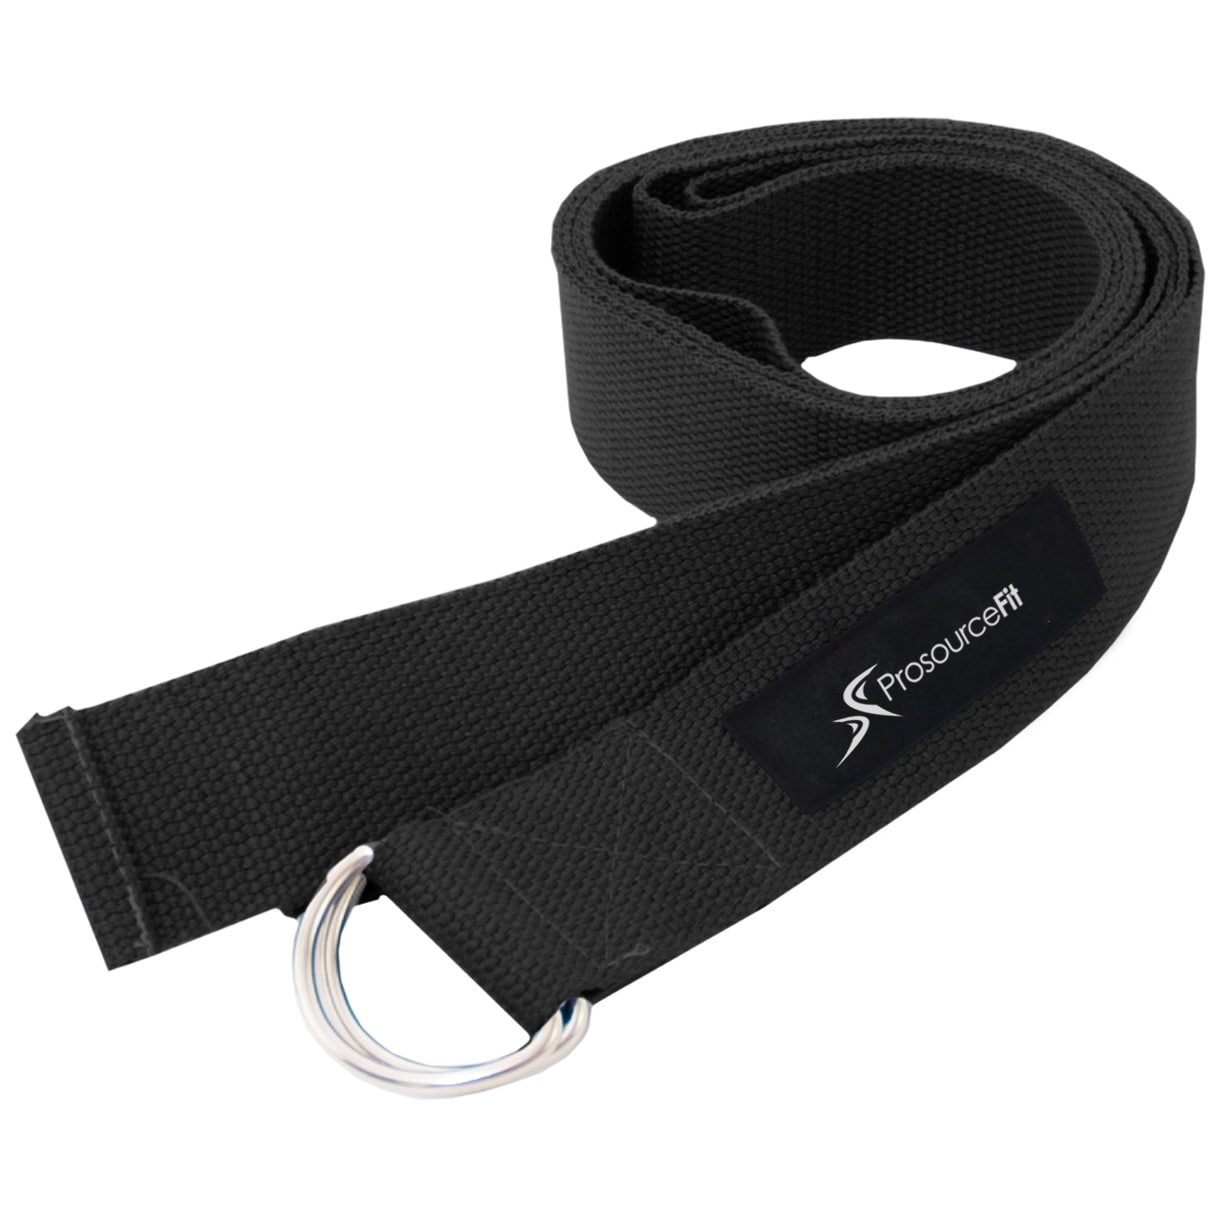 ProsourceFit Metal D-Ring Yoga Strap 8' for Stretching and Flexibility